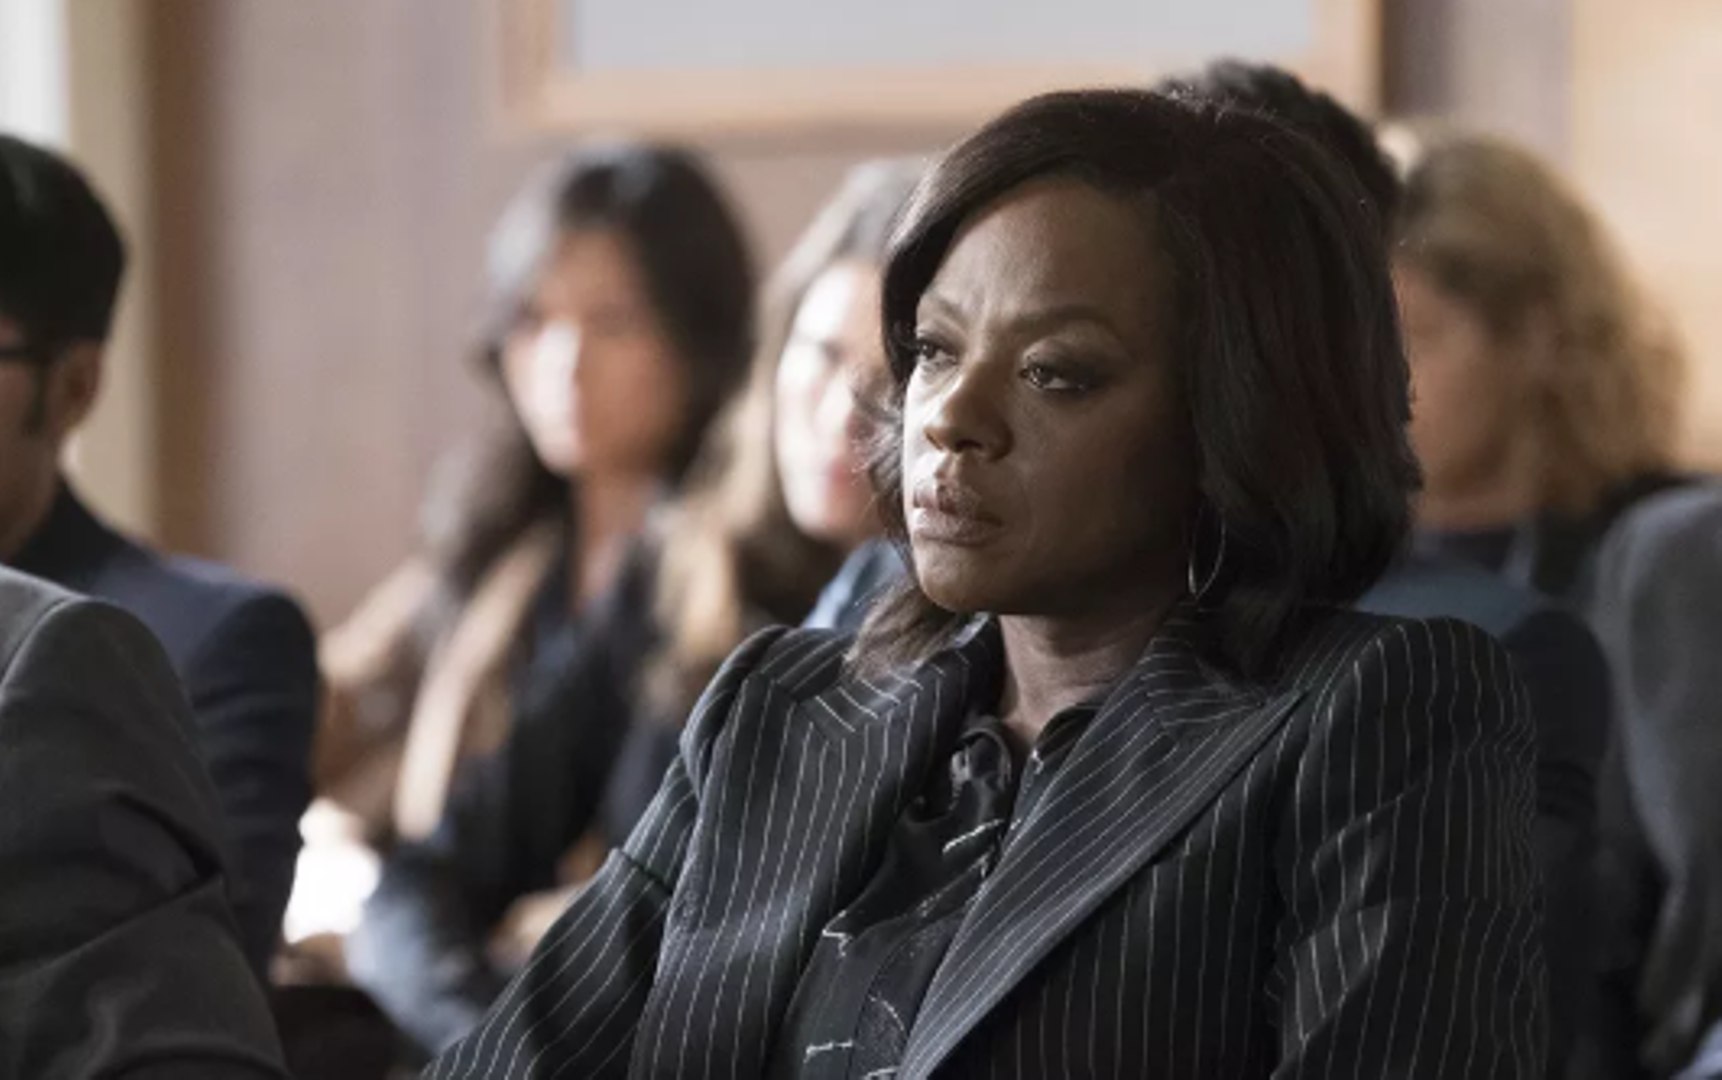 How to get away with murder, "i got played"